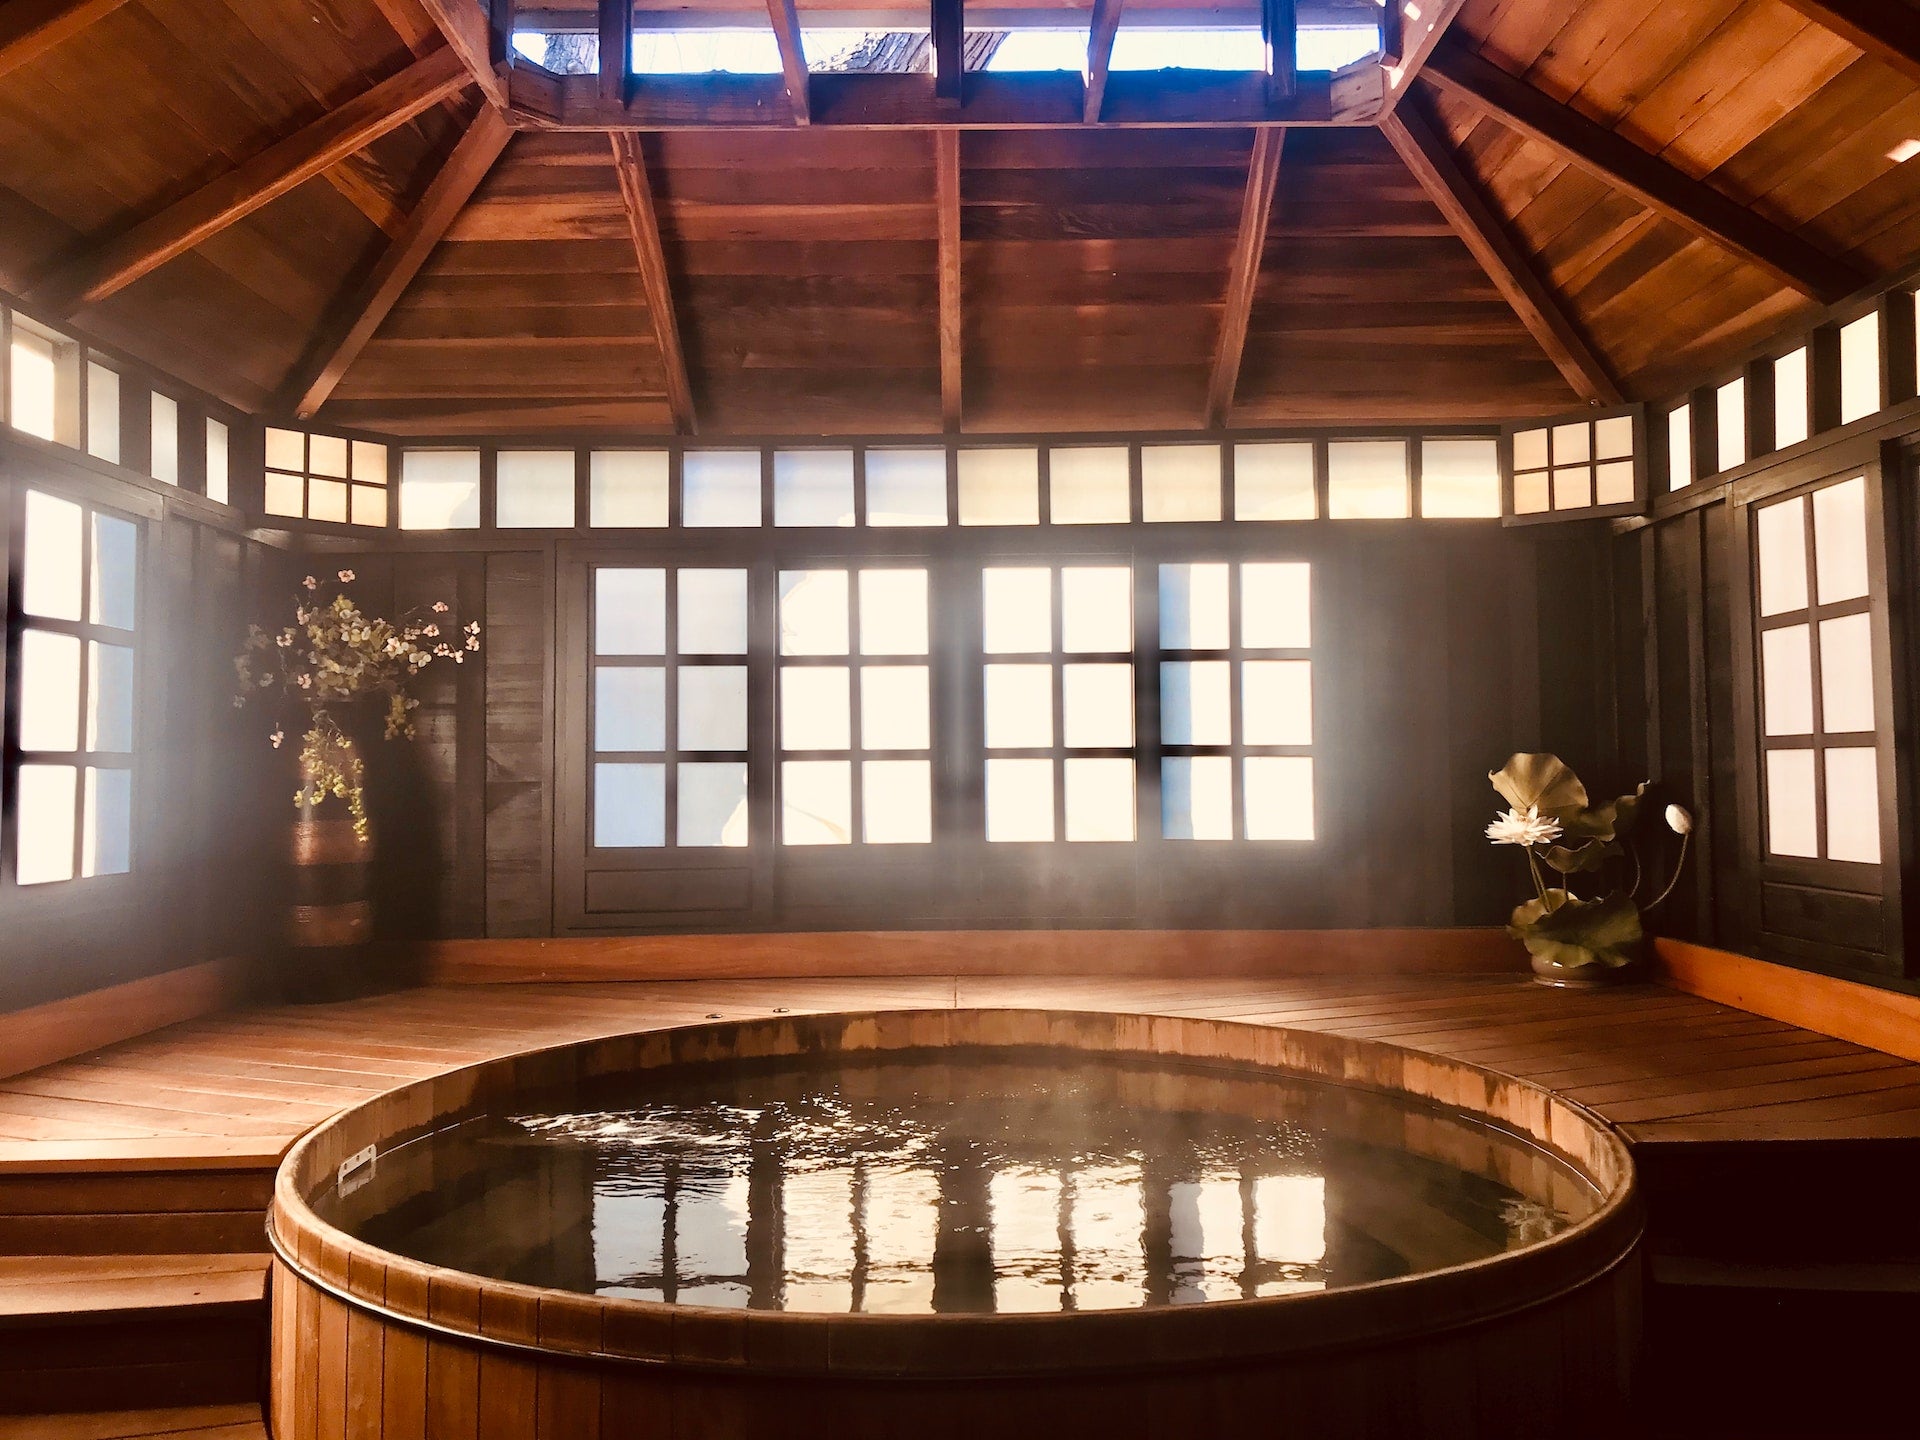 Enhance Your Spa Experience with Energy-Efficient Hot Tub Tips